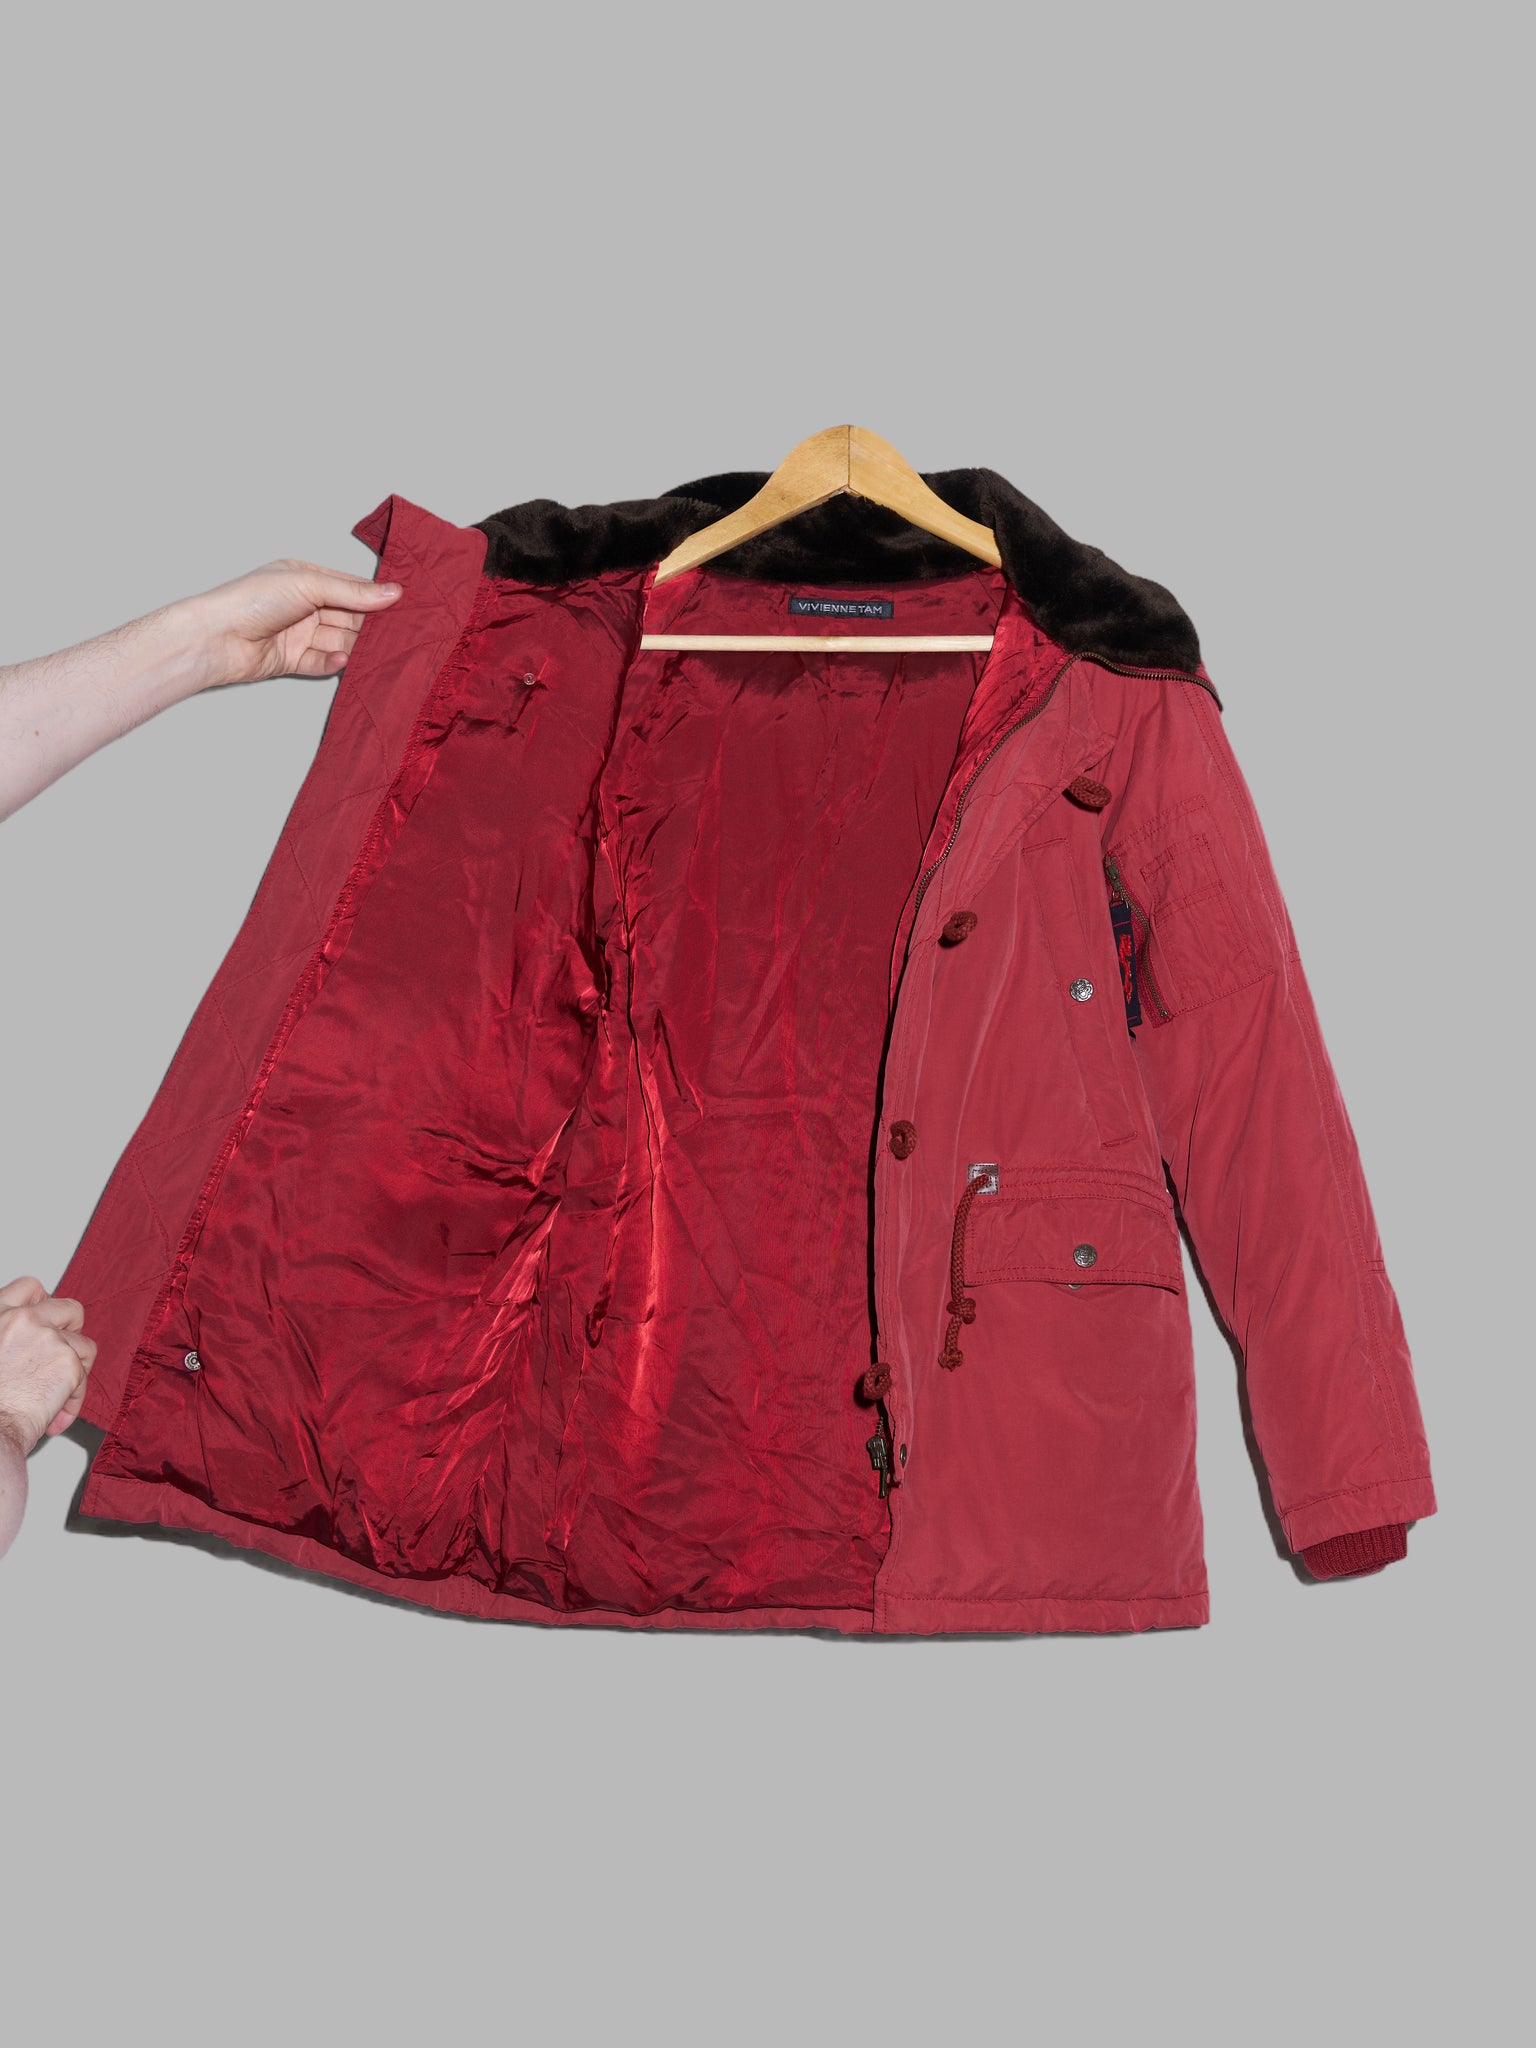 Vivienne Tam red N-3B style down puffer coat - size 1 S XS